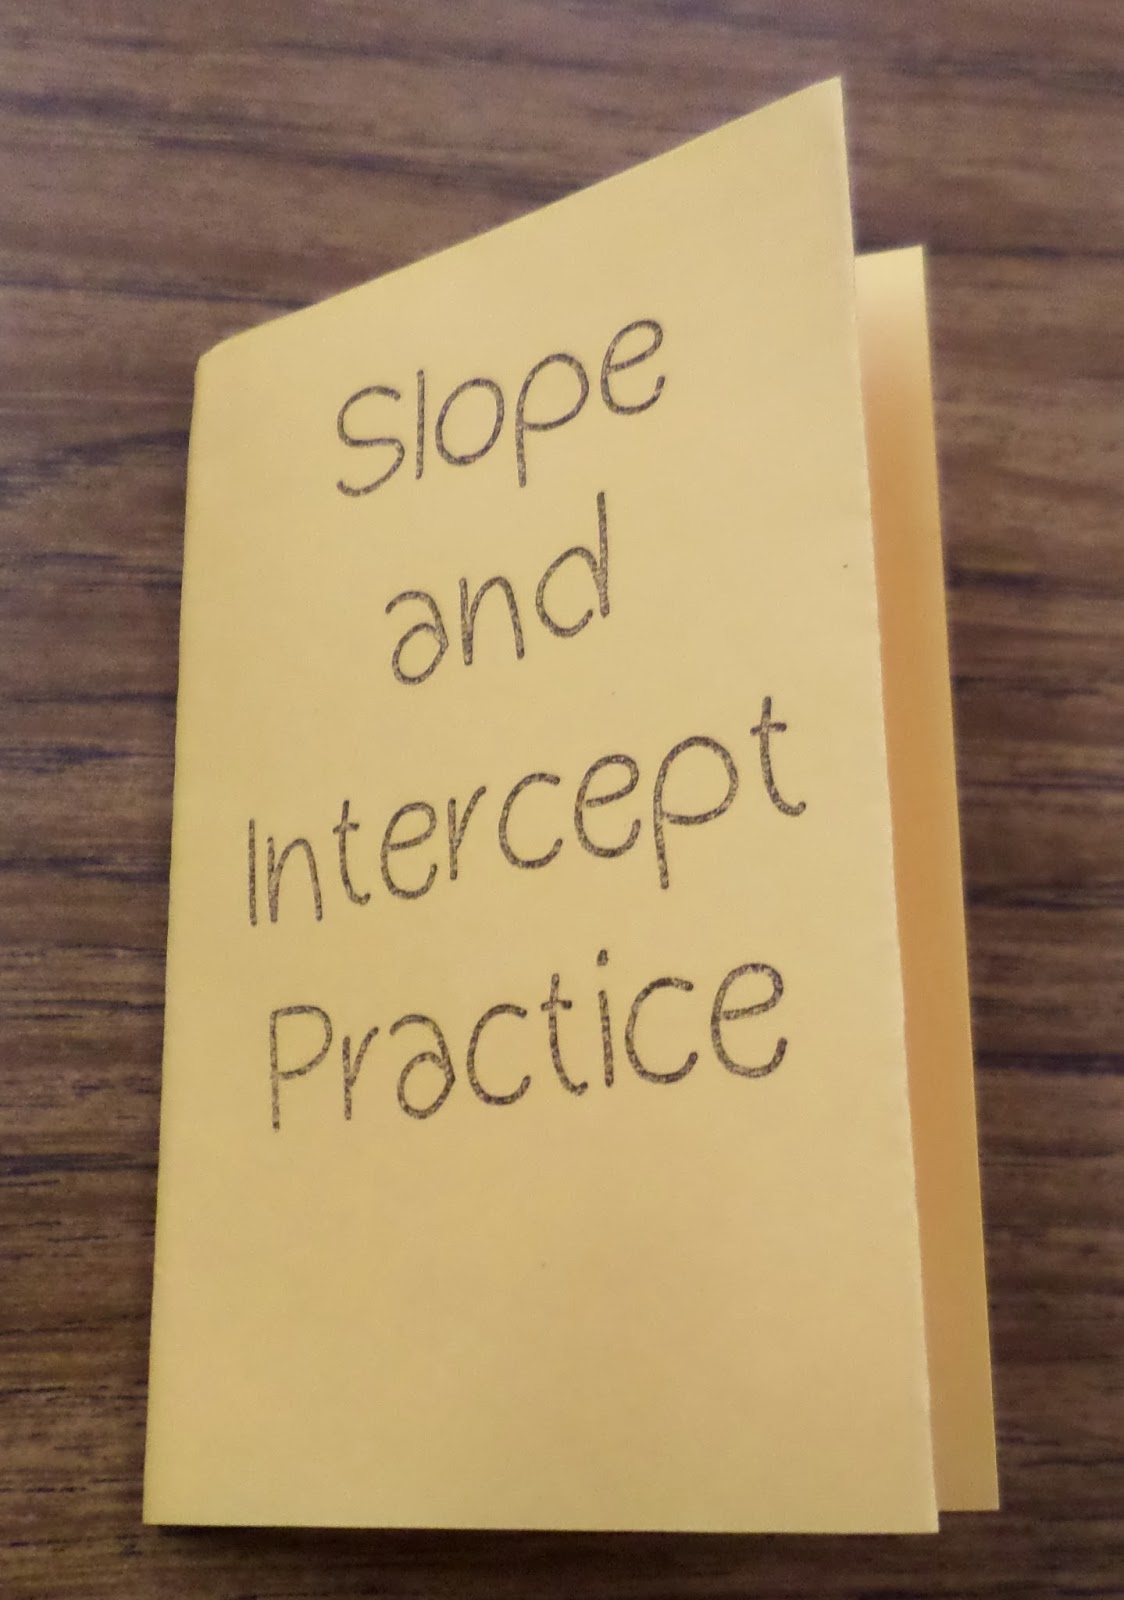 slope and intercept practice poof book intercepts interactive notebook page math